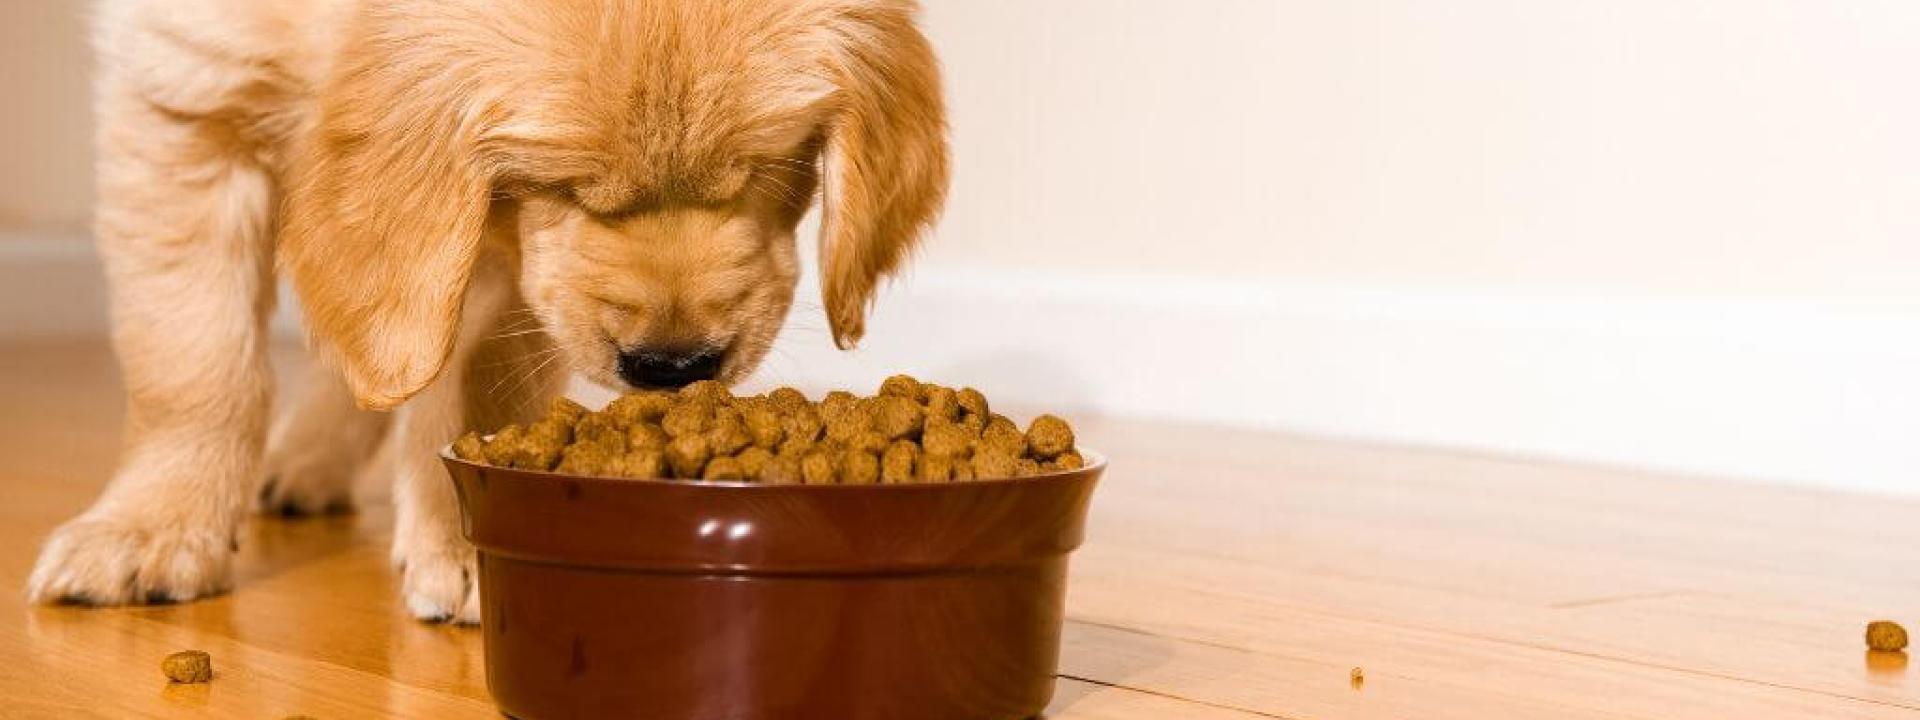 A dog eating out of a food bowl.